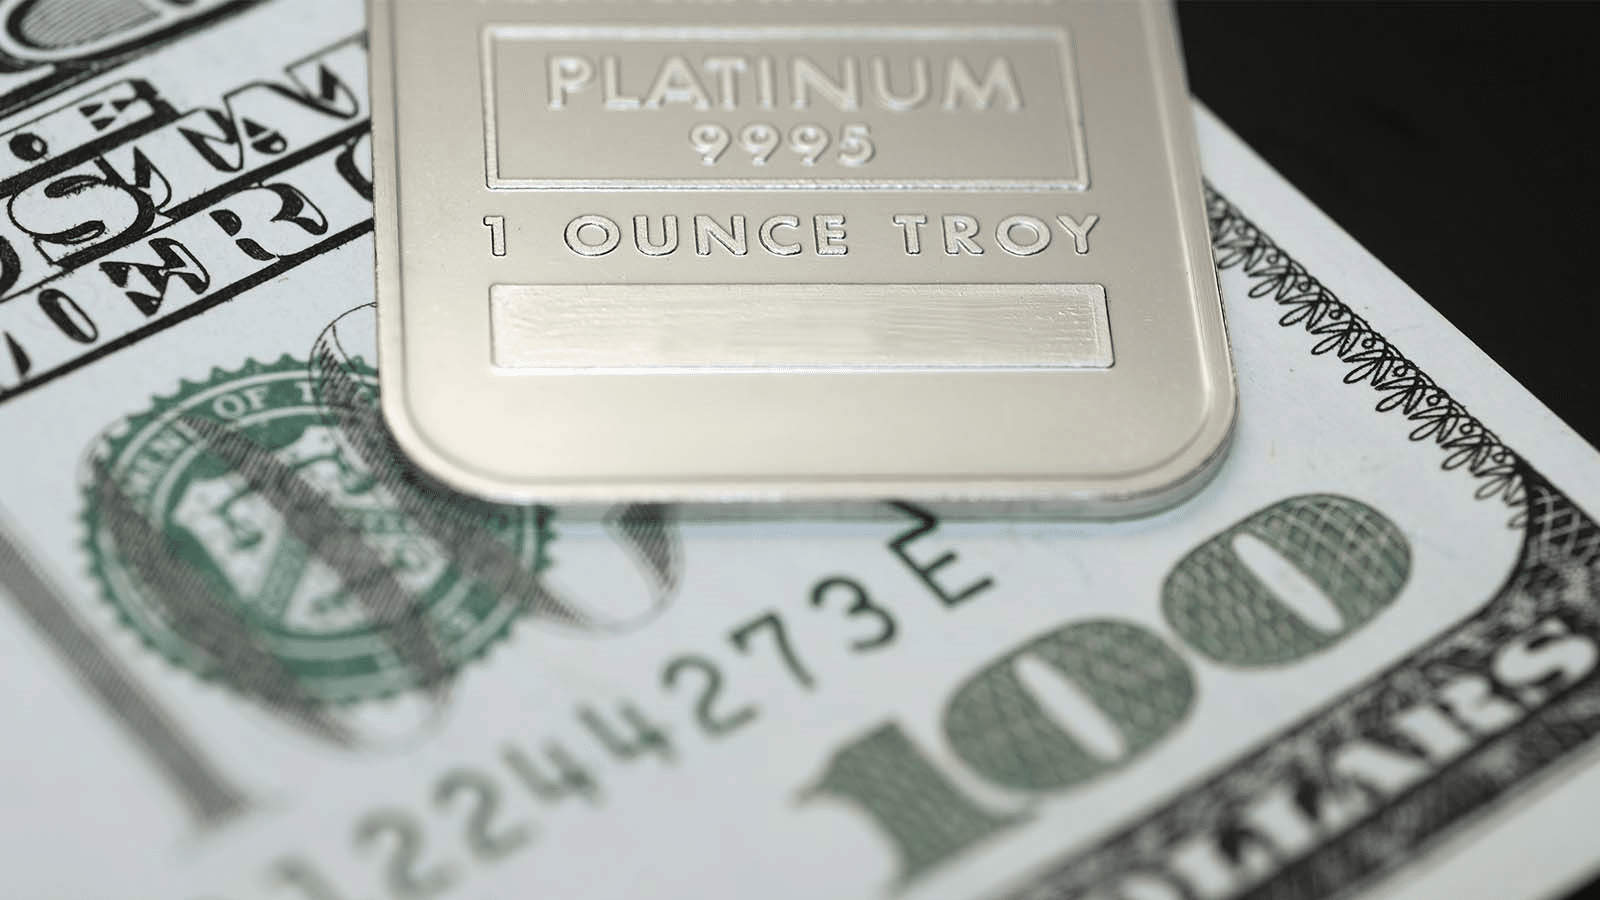 One troy ounce bar of platinum and a $100 bill.